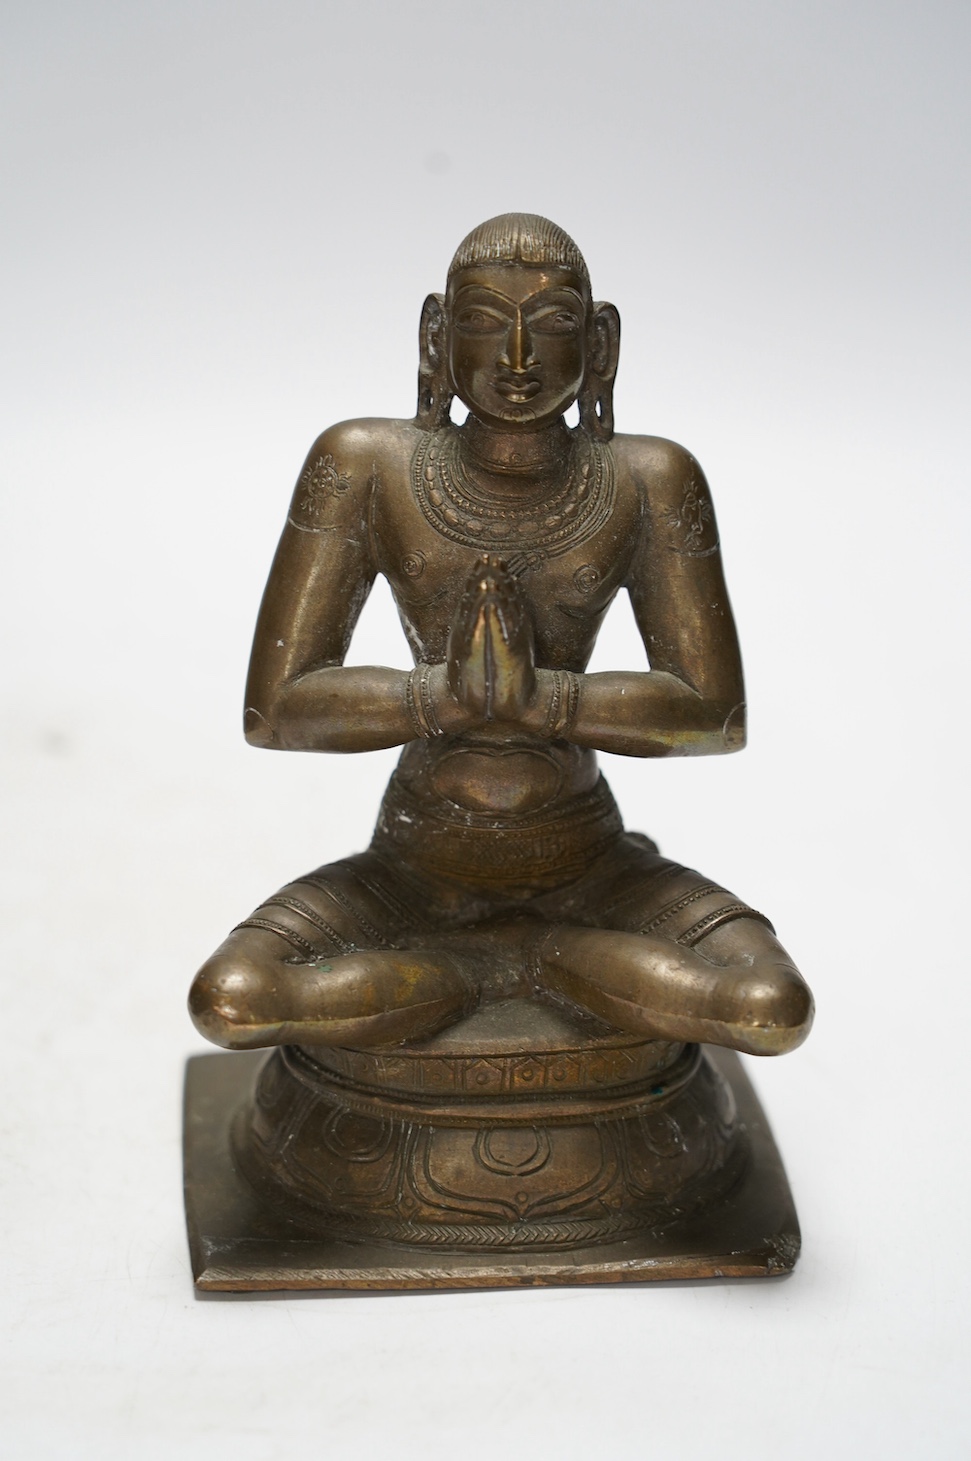 A Chinese bronze censer and cover, a Chinese bronze bowl and an Indian bronze seated deity, tallest 19cm high. Condition - fair some general scuffs and wear, the figure has a chip